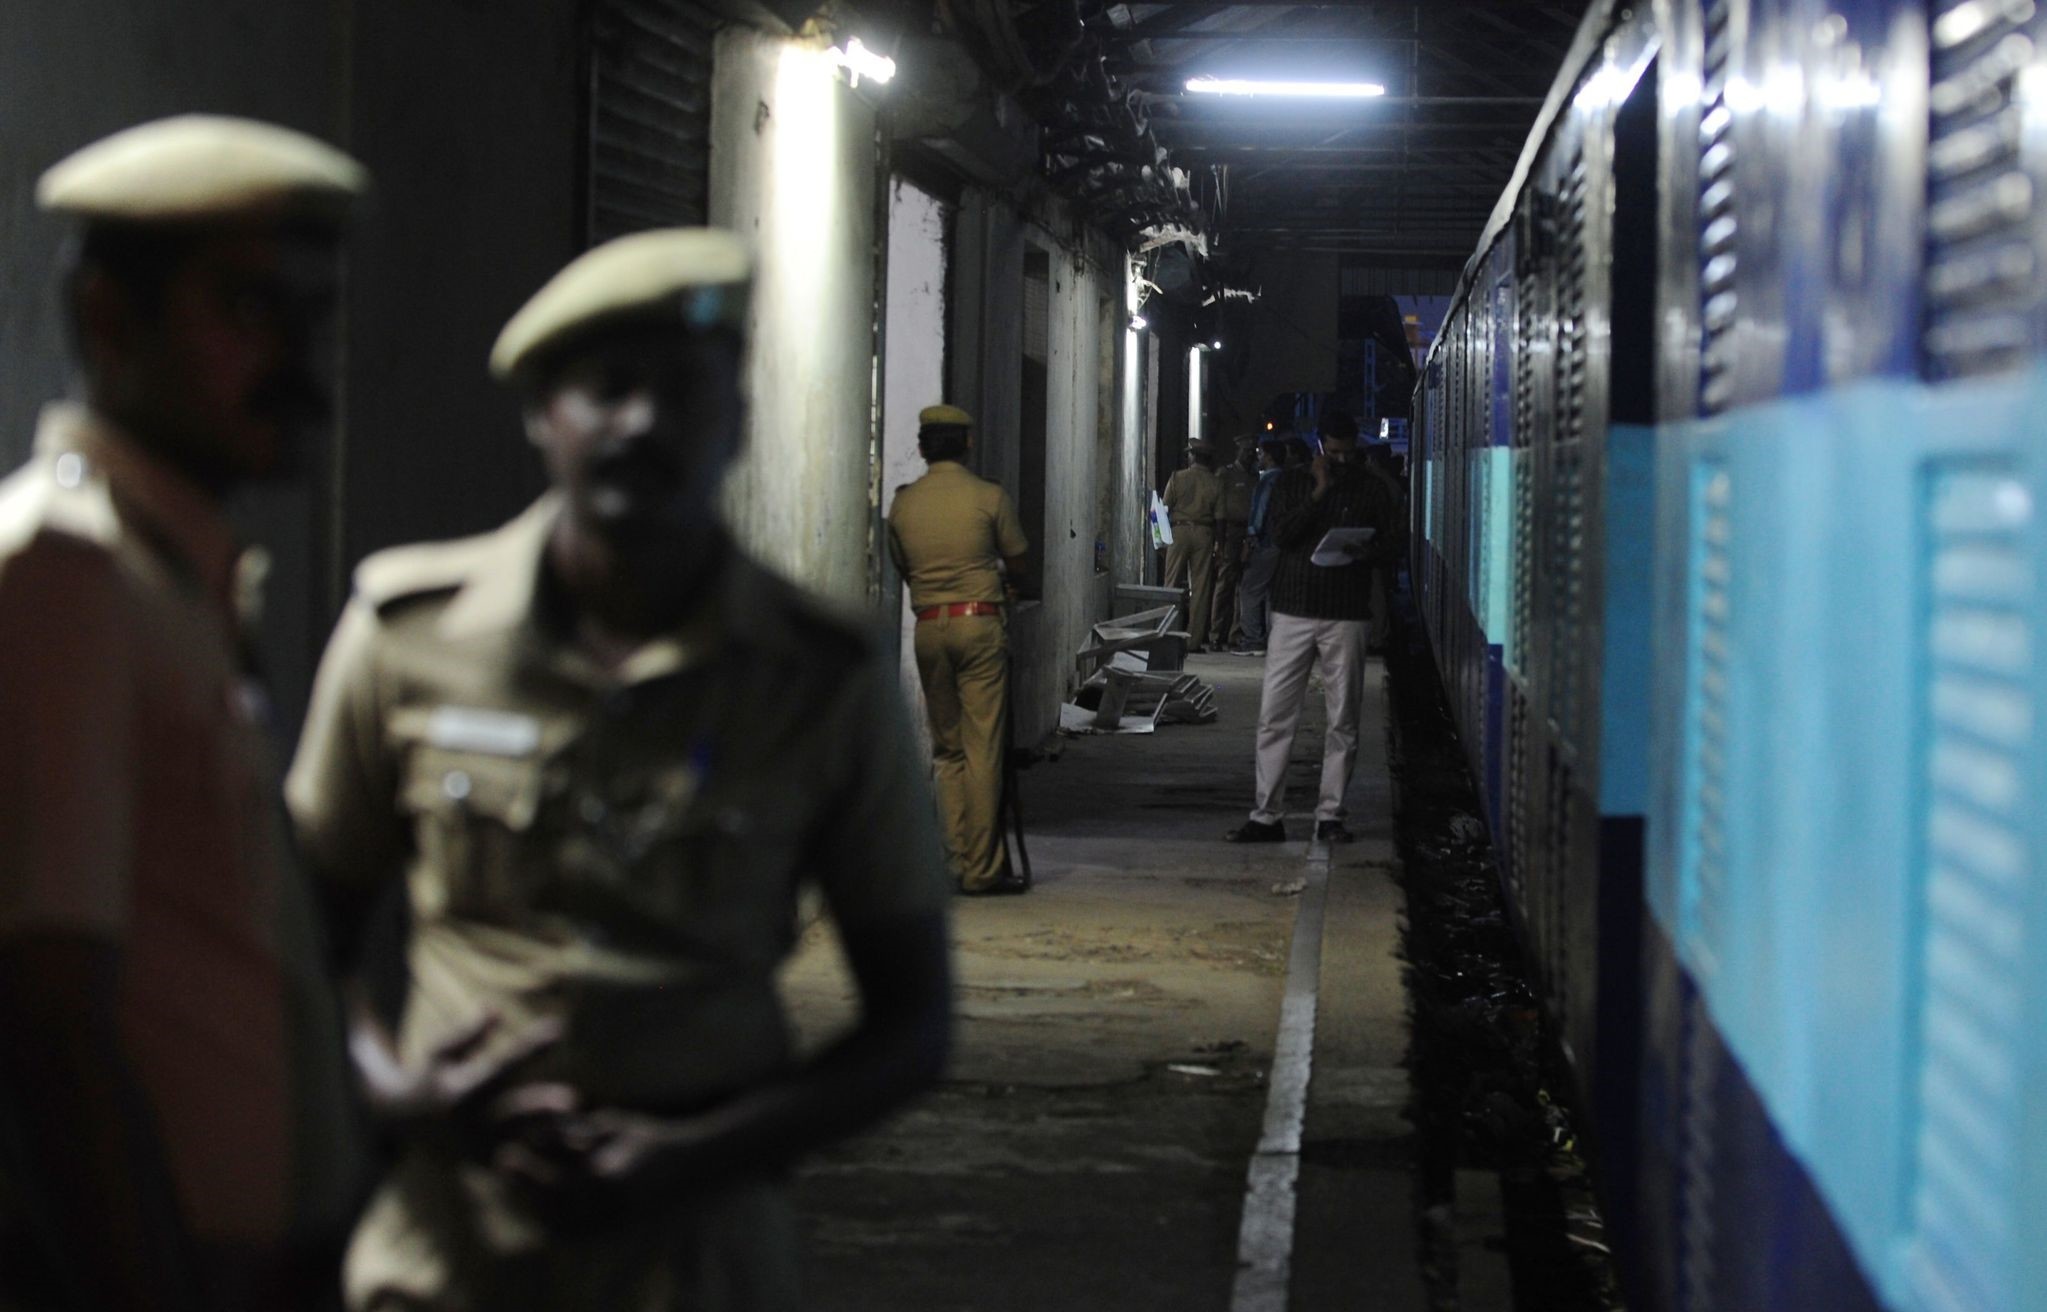 Indian police personnel stand guard alongside the Salem-Chennai Express train, which was robbed while in transit, at Egmore Railway station in Chennai on August 9, 2016. (AFP Photo)